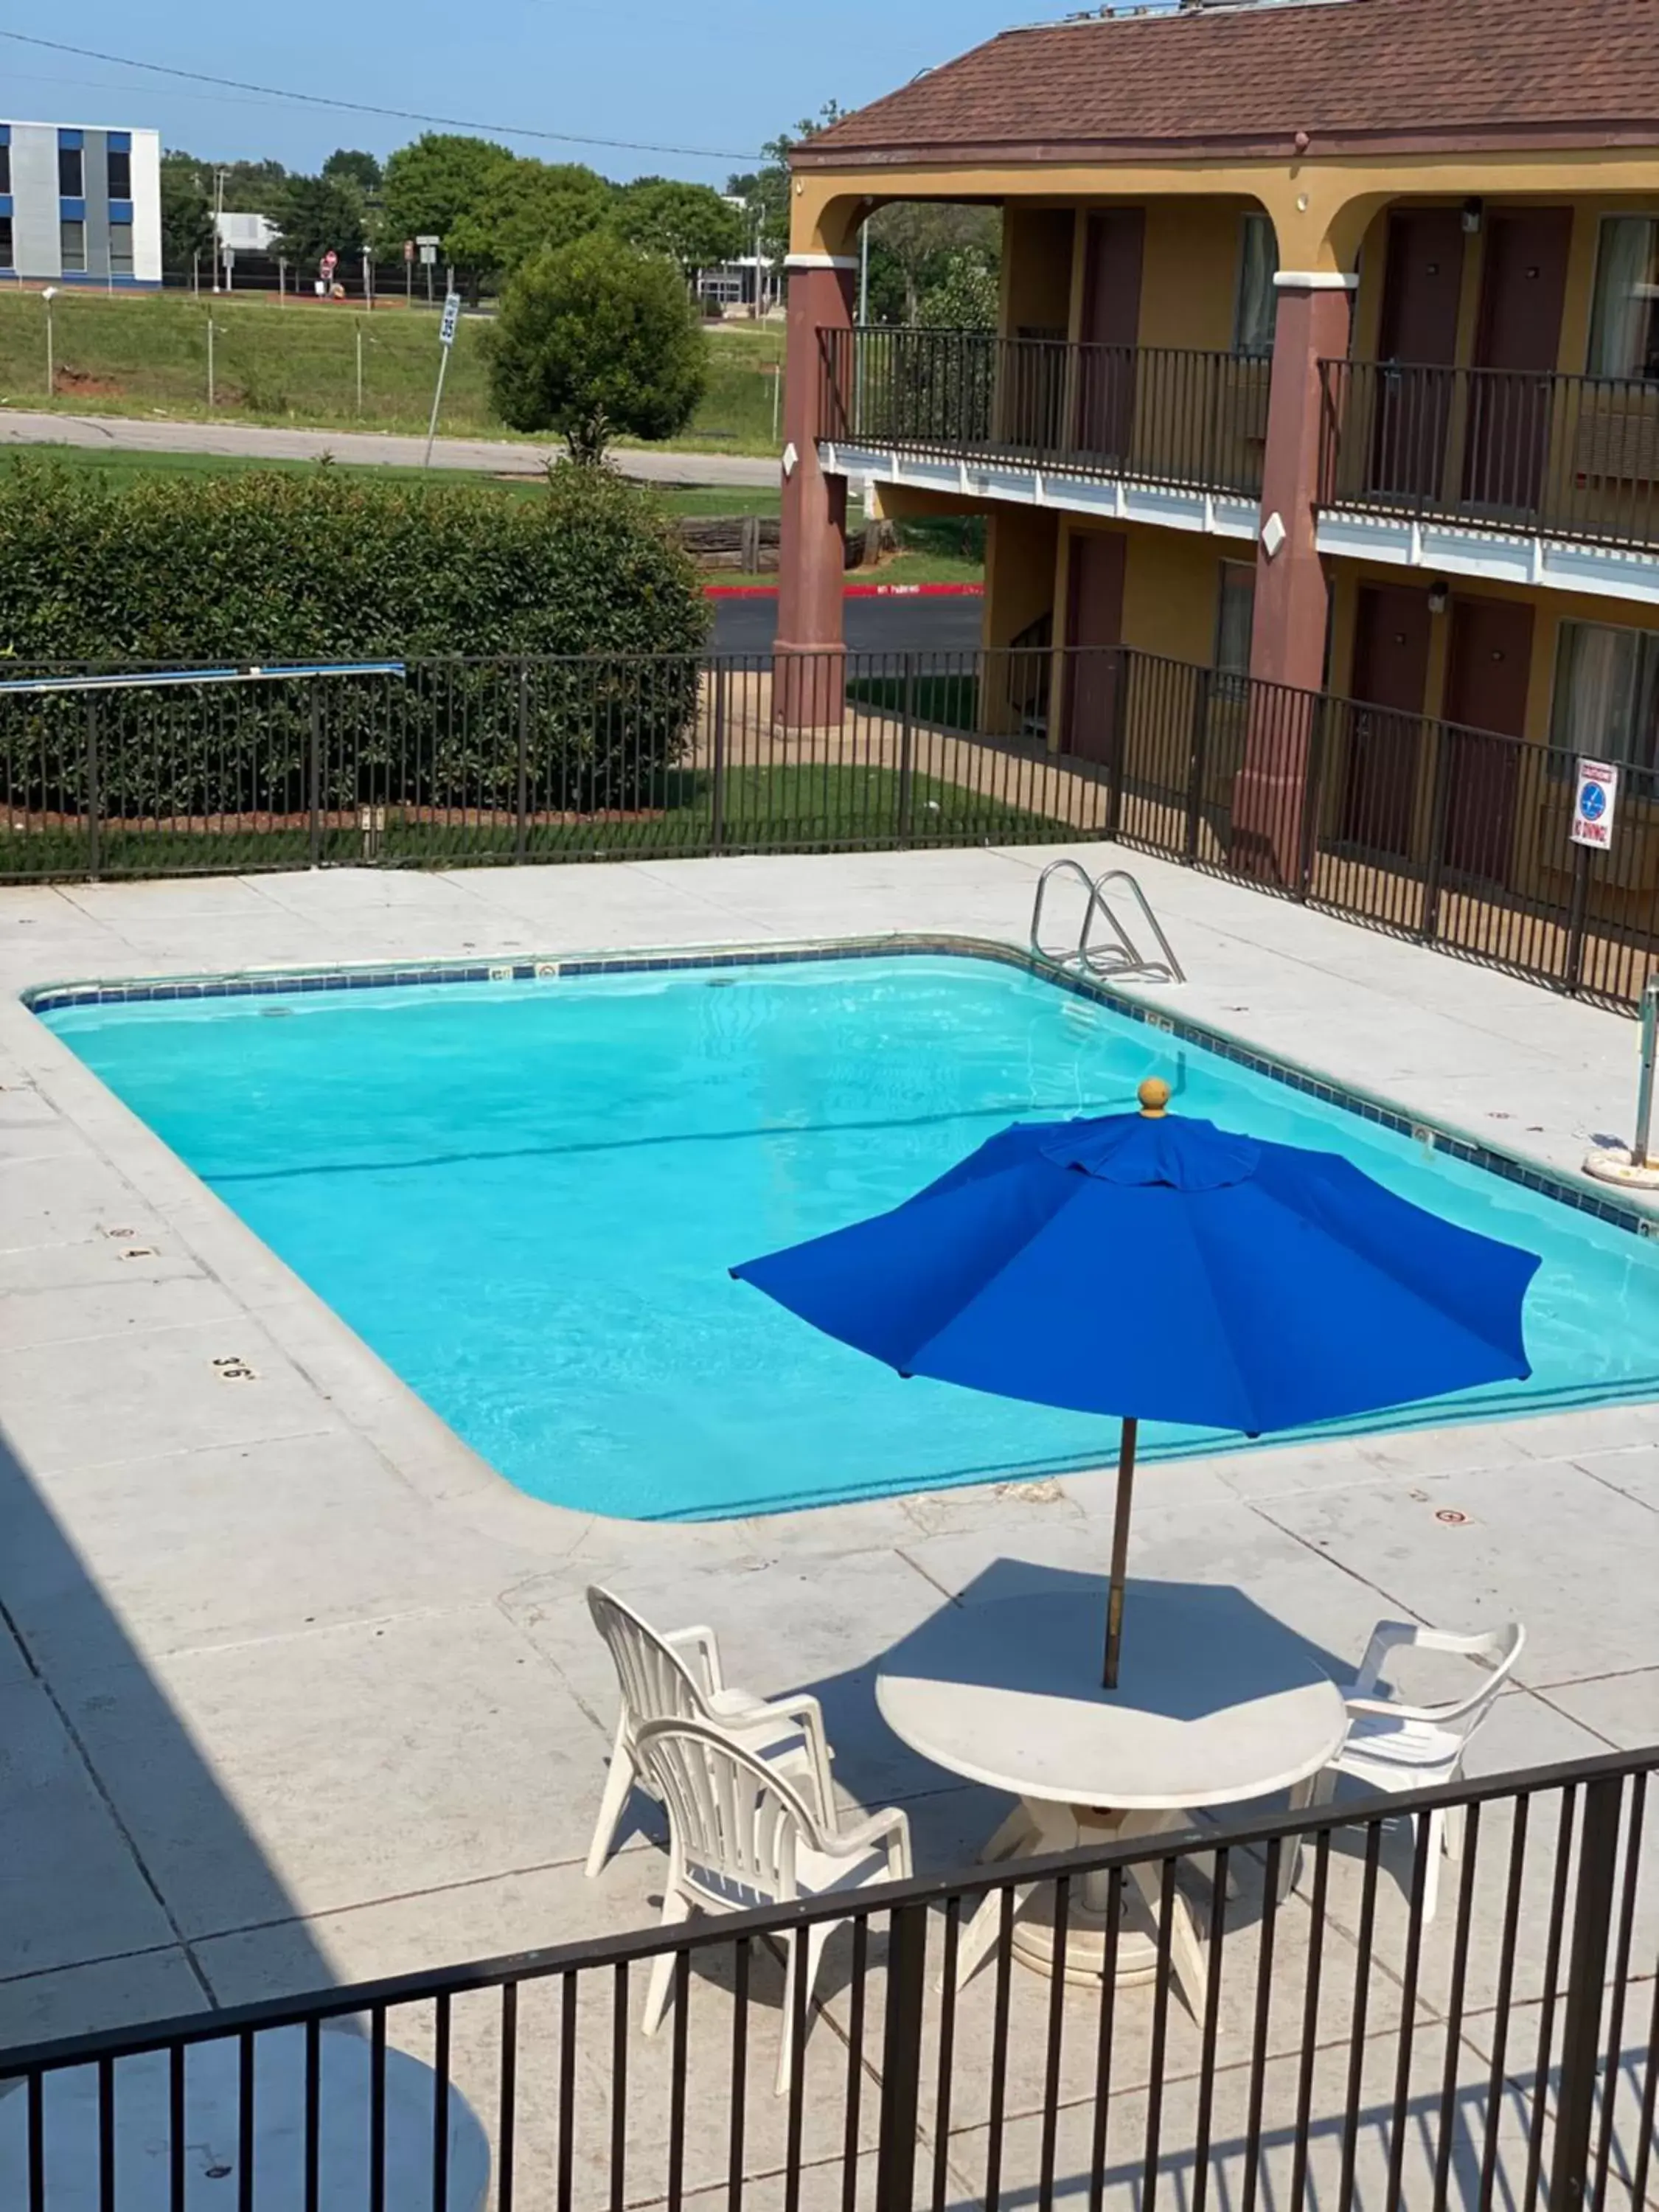 Pool view in Super 8 by Wyndham Midwest City OK